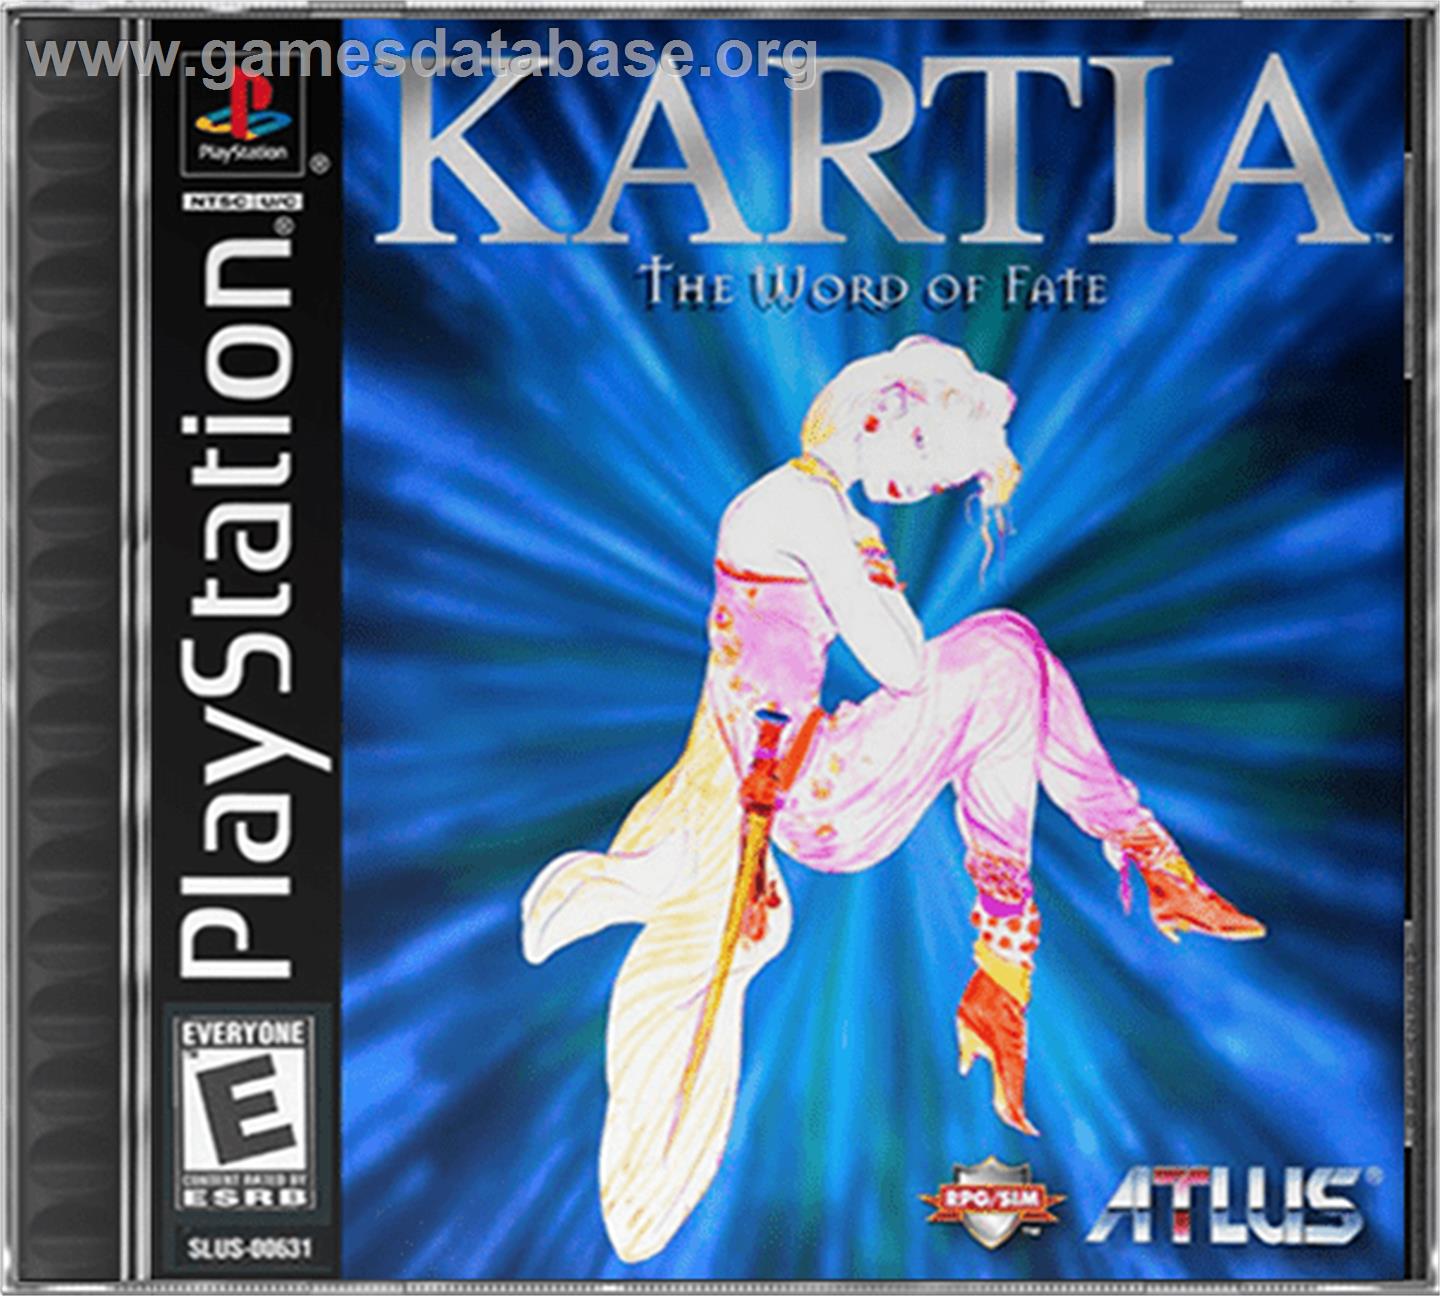 Kartia: The Word of Fate - Sony Playstation - Artwork - Box